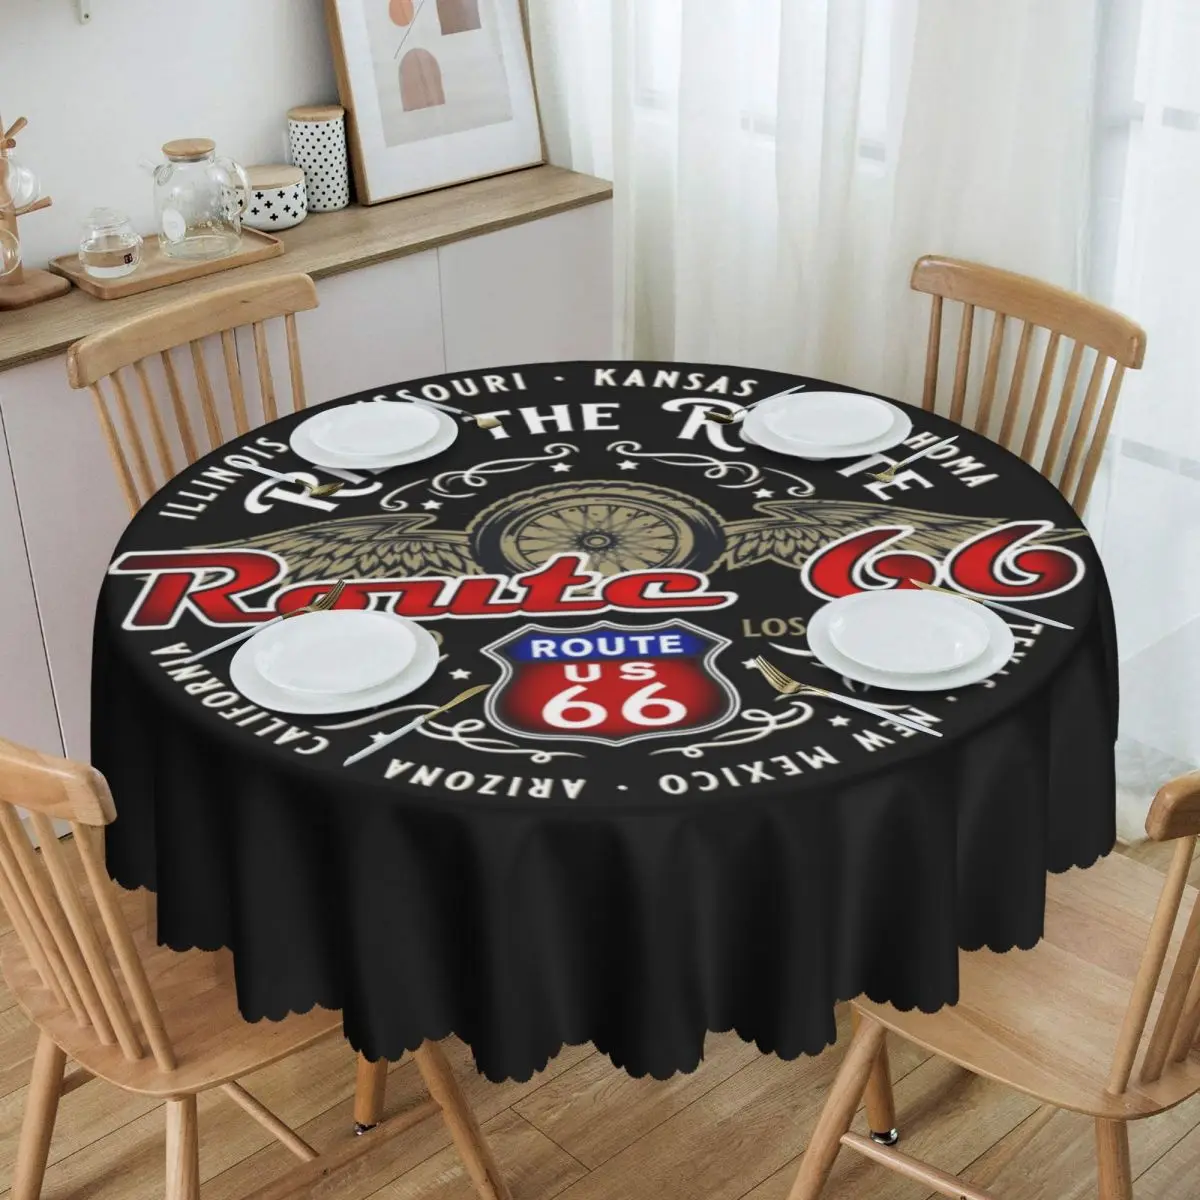 

Waterproof Ride The Route 66 Biker Motorcycle Cruise America's Highway Table Cover The Road Tablecloth for Picnic Table Cloth